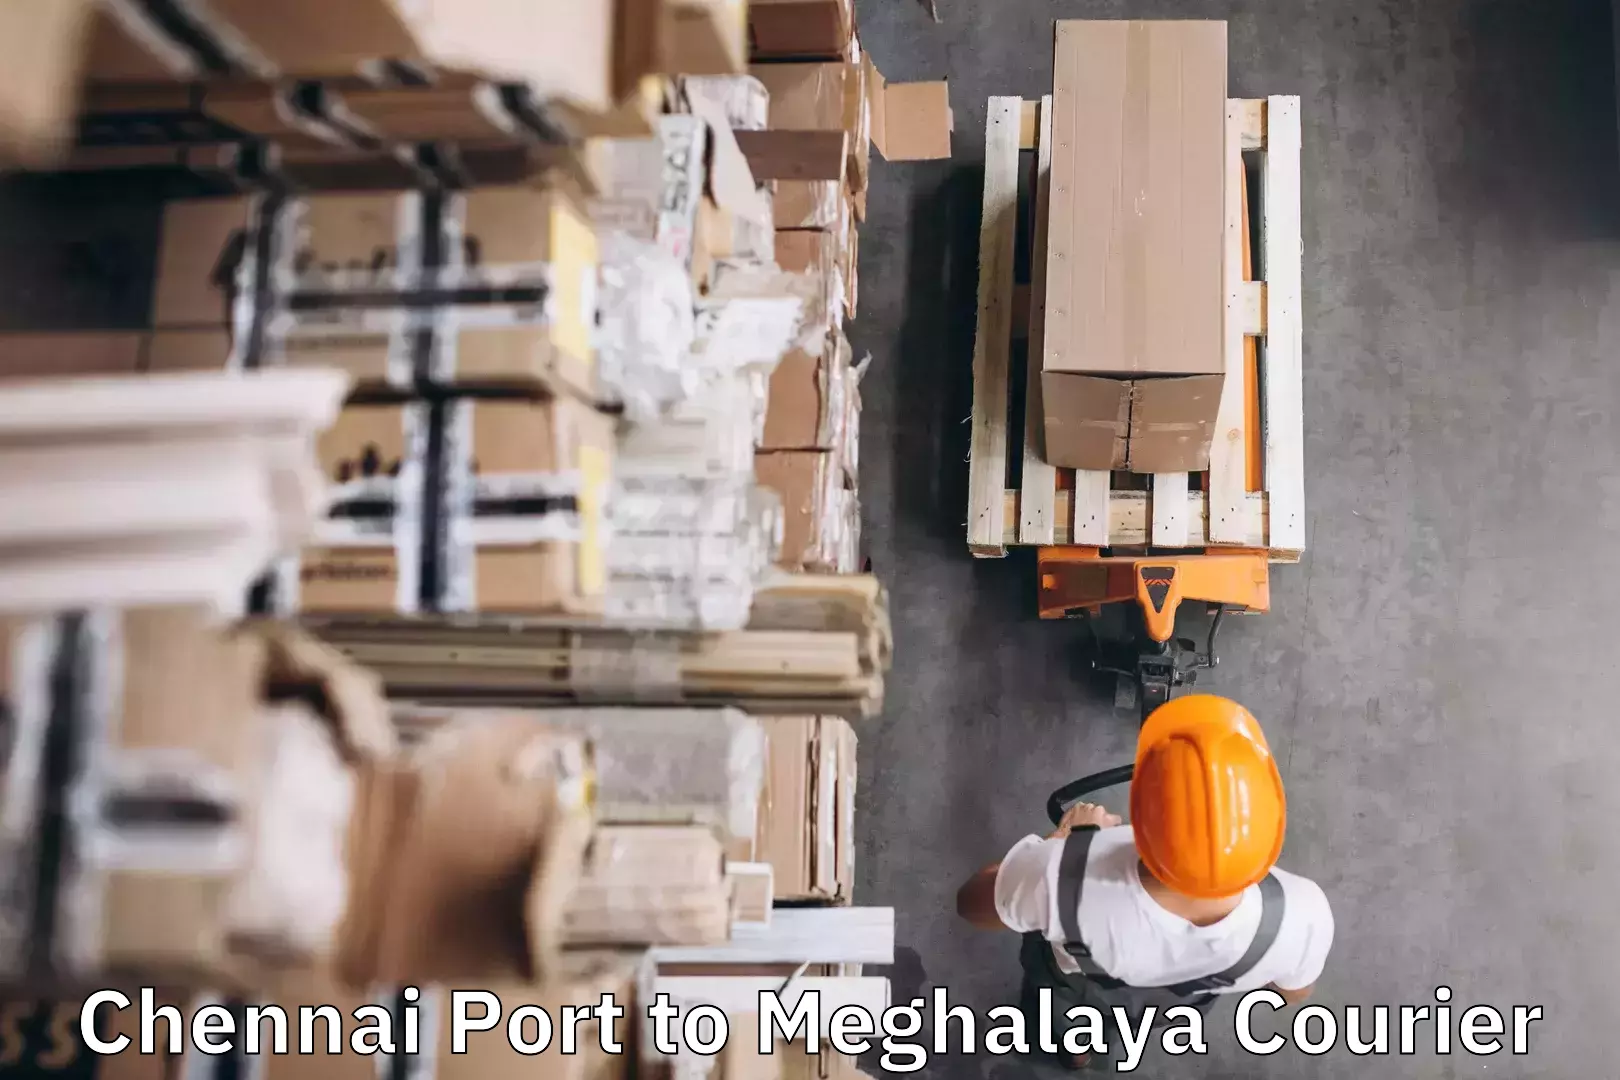 Luggage transport consultancy Chennai Port to Dkhiah West